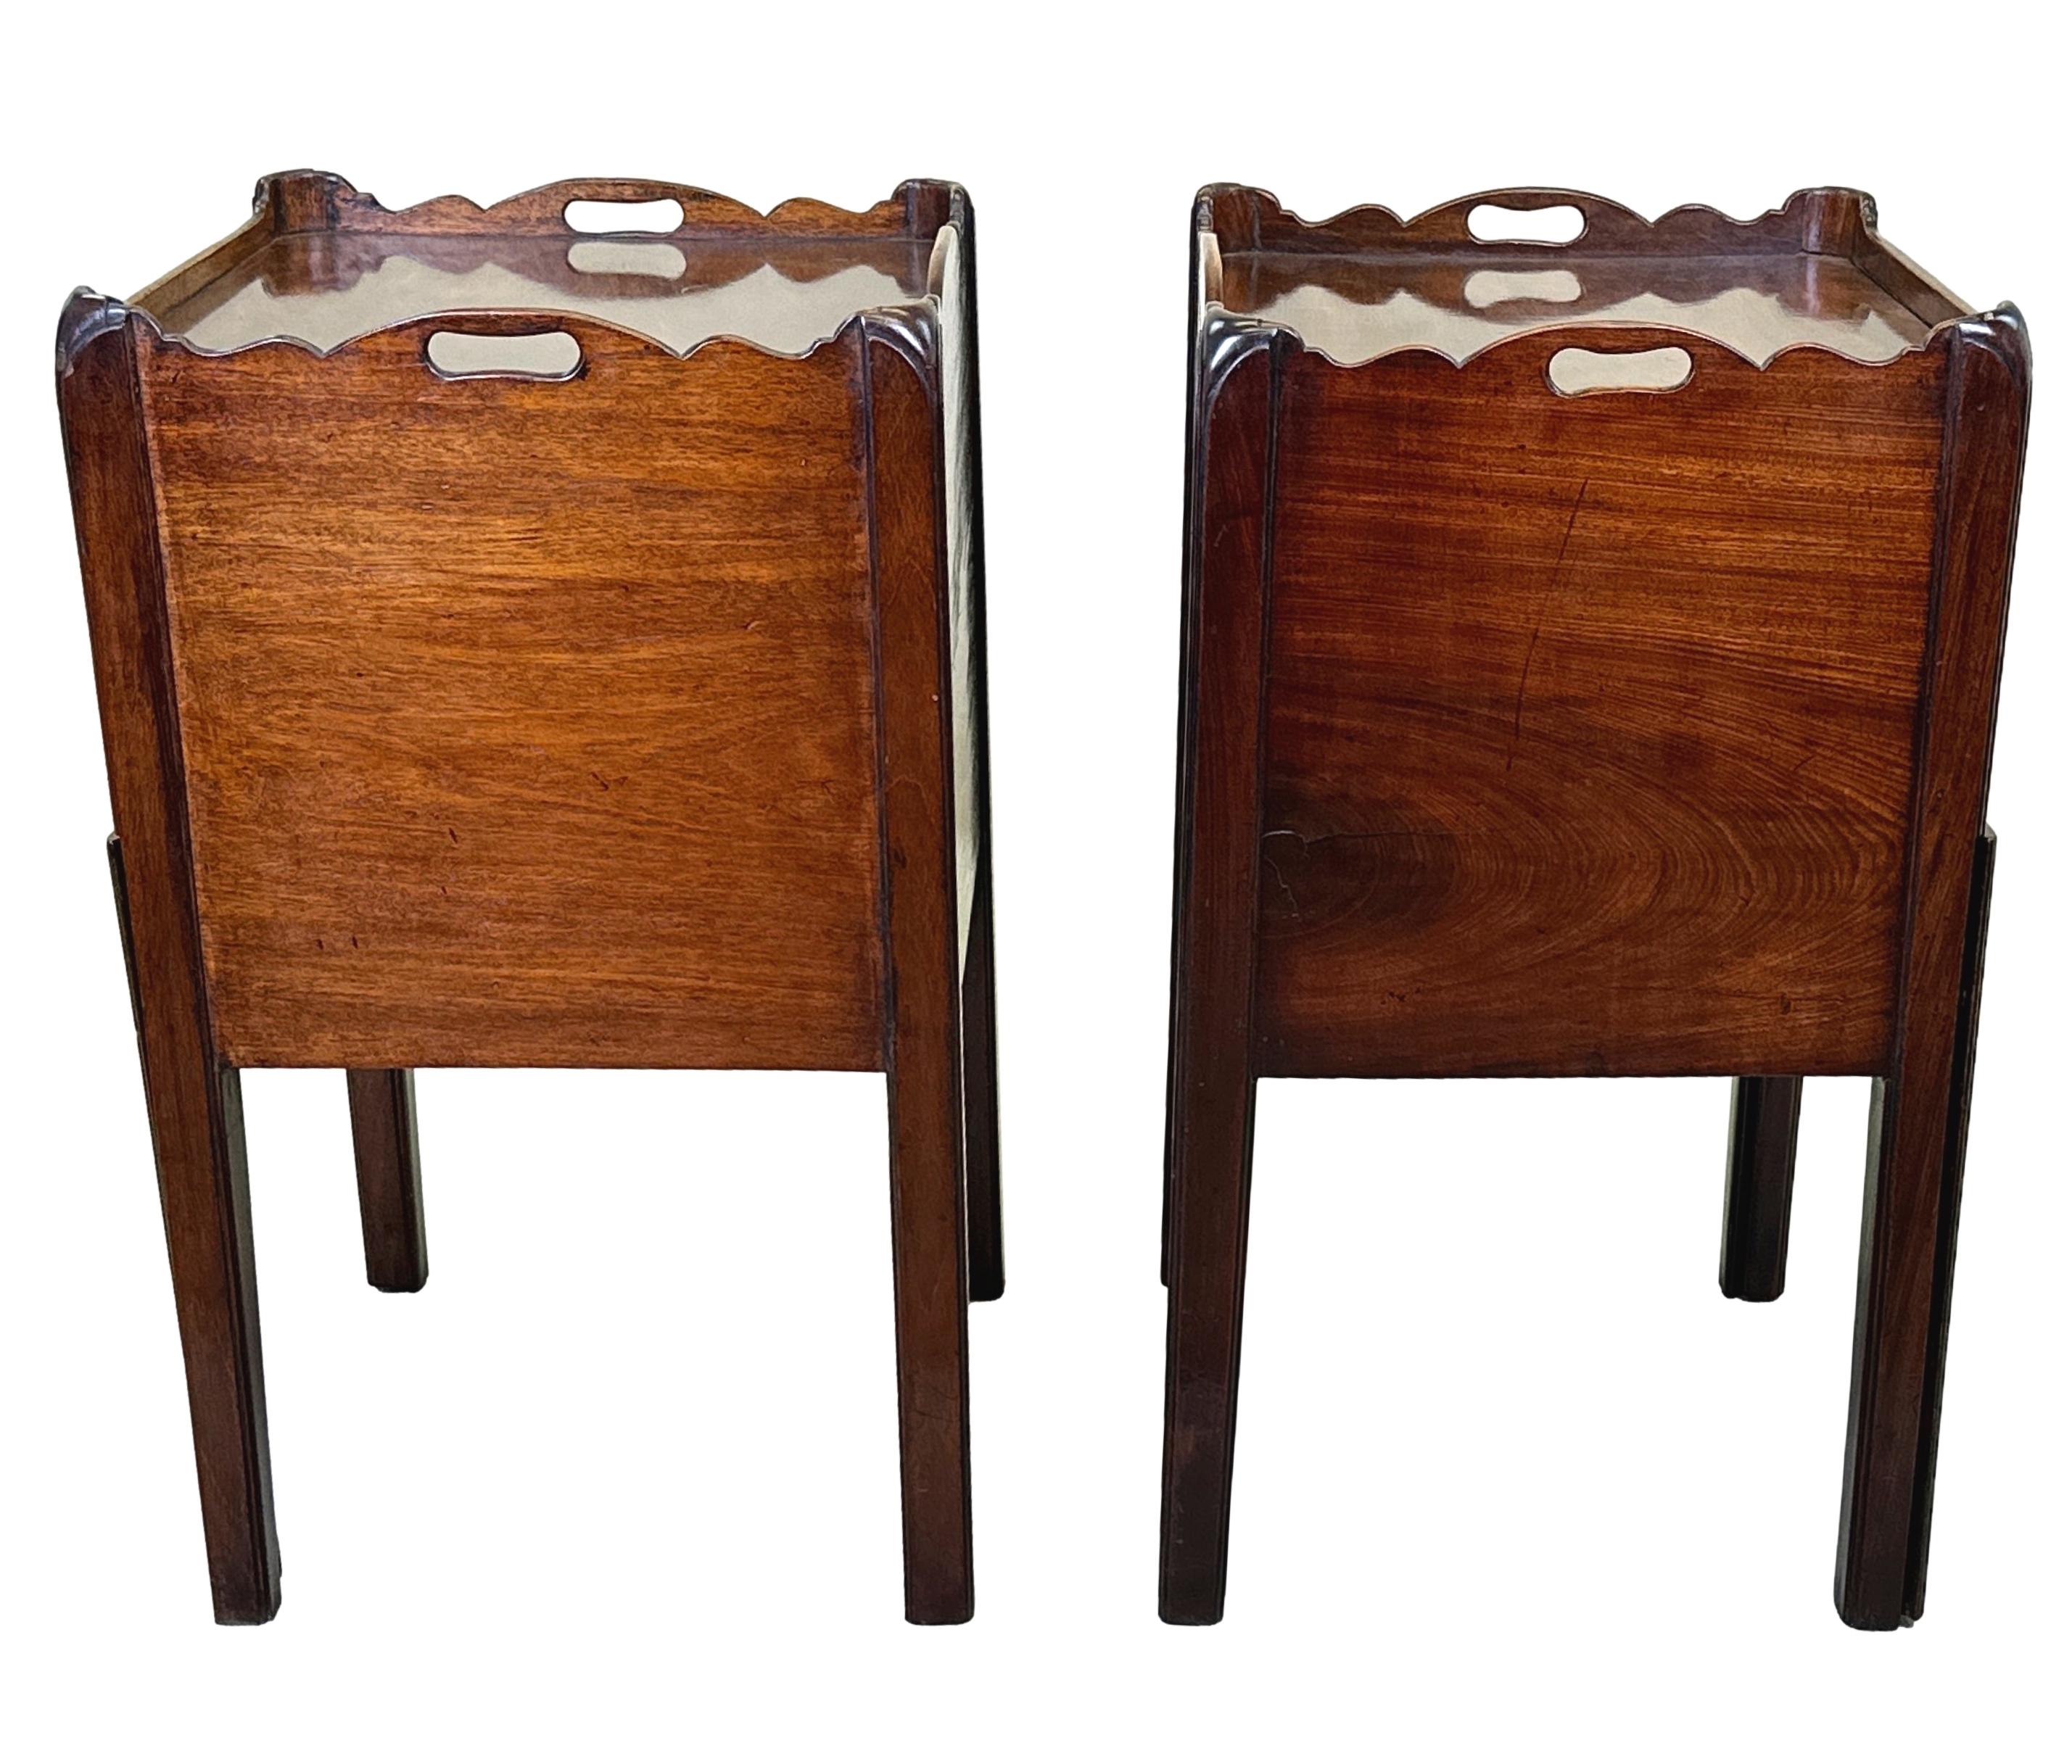 Pair Of 18th Century Mahogany Bedside Night Tables In Good Condition For Sale In Bedfordshire, GB